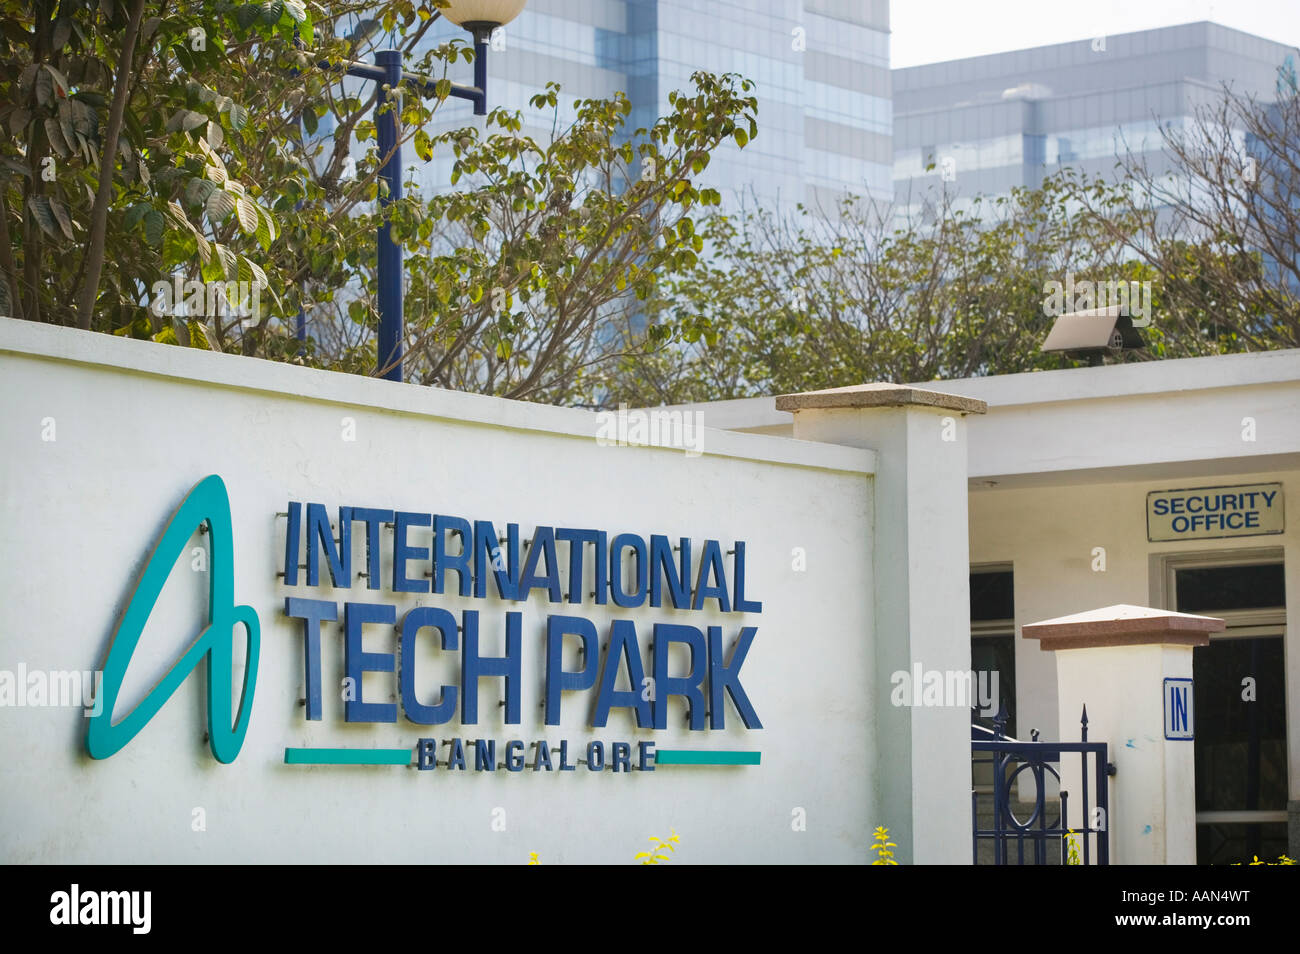 Entrance to International Tech Park, a major software manufacturing centre in Bangalore. Stock Photo